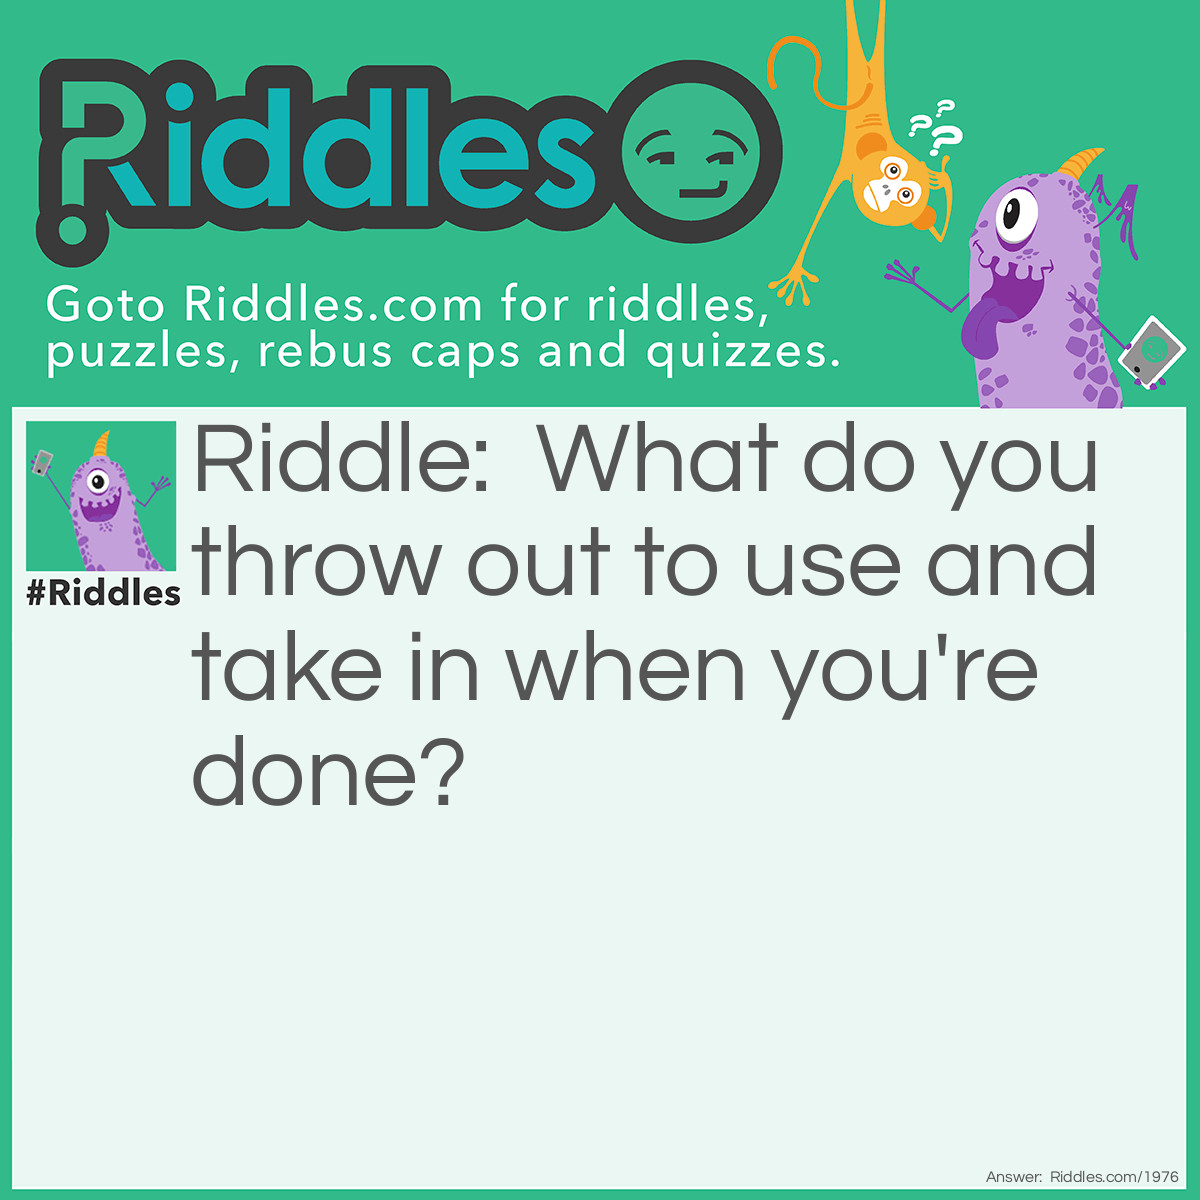 Riddle: What do you throw out to use and take in when you're done? Answer: An anchor.